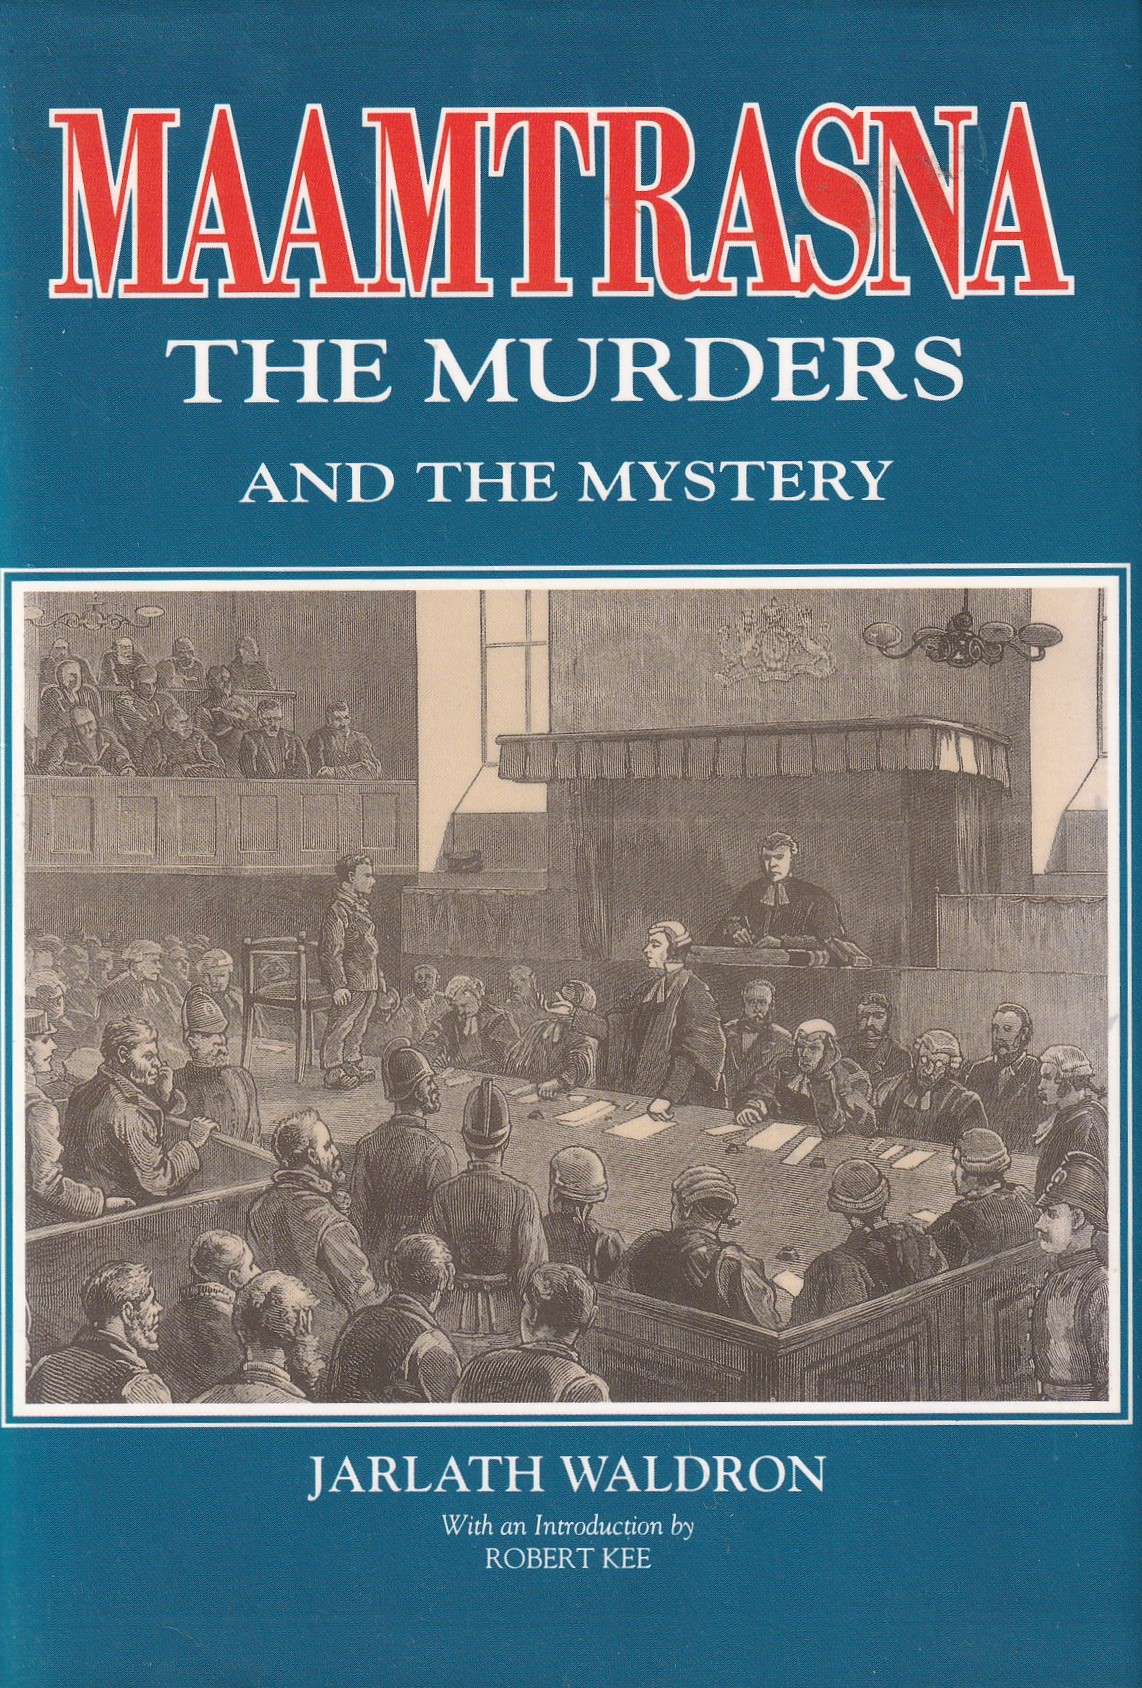 Maamtrasna: The Murders and the Mystery | Jarlath Waldron | Charlie Byrne's